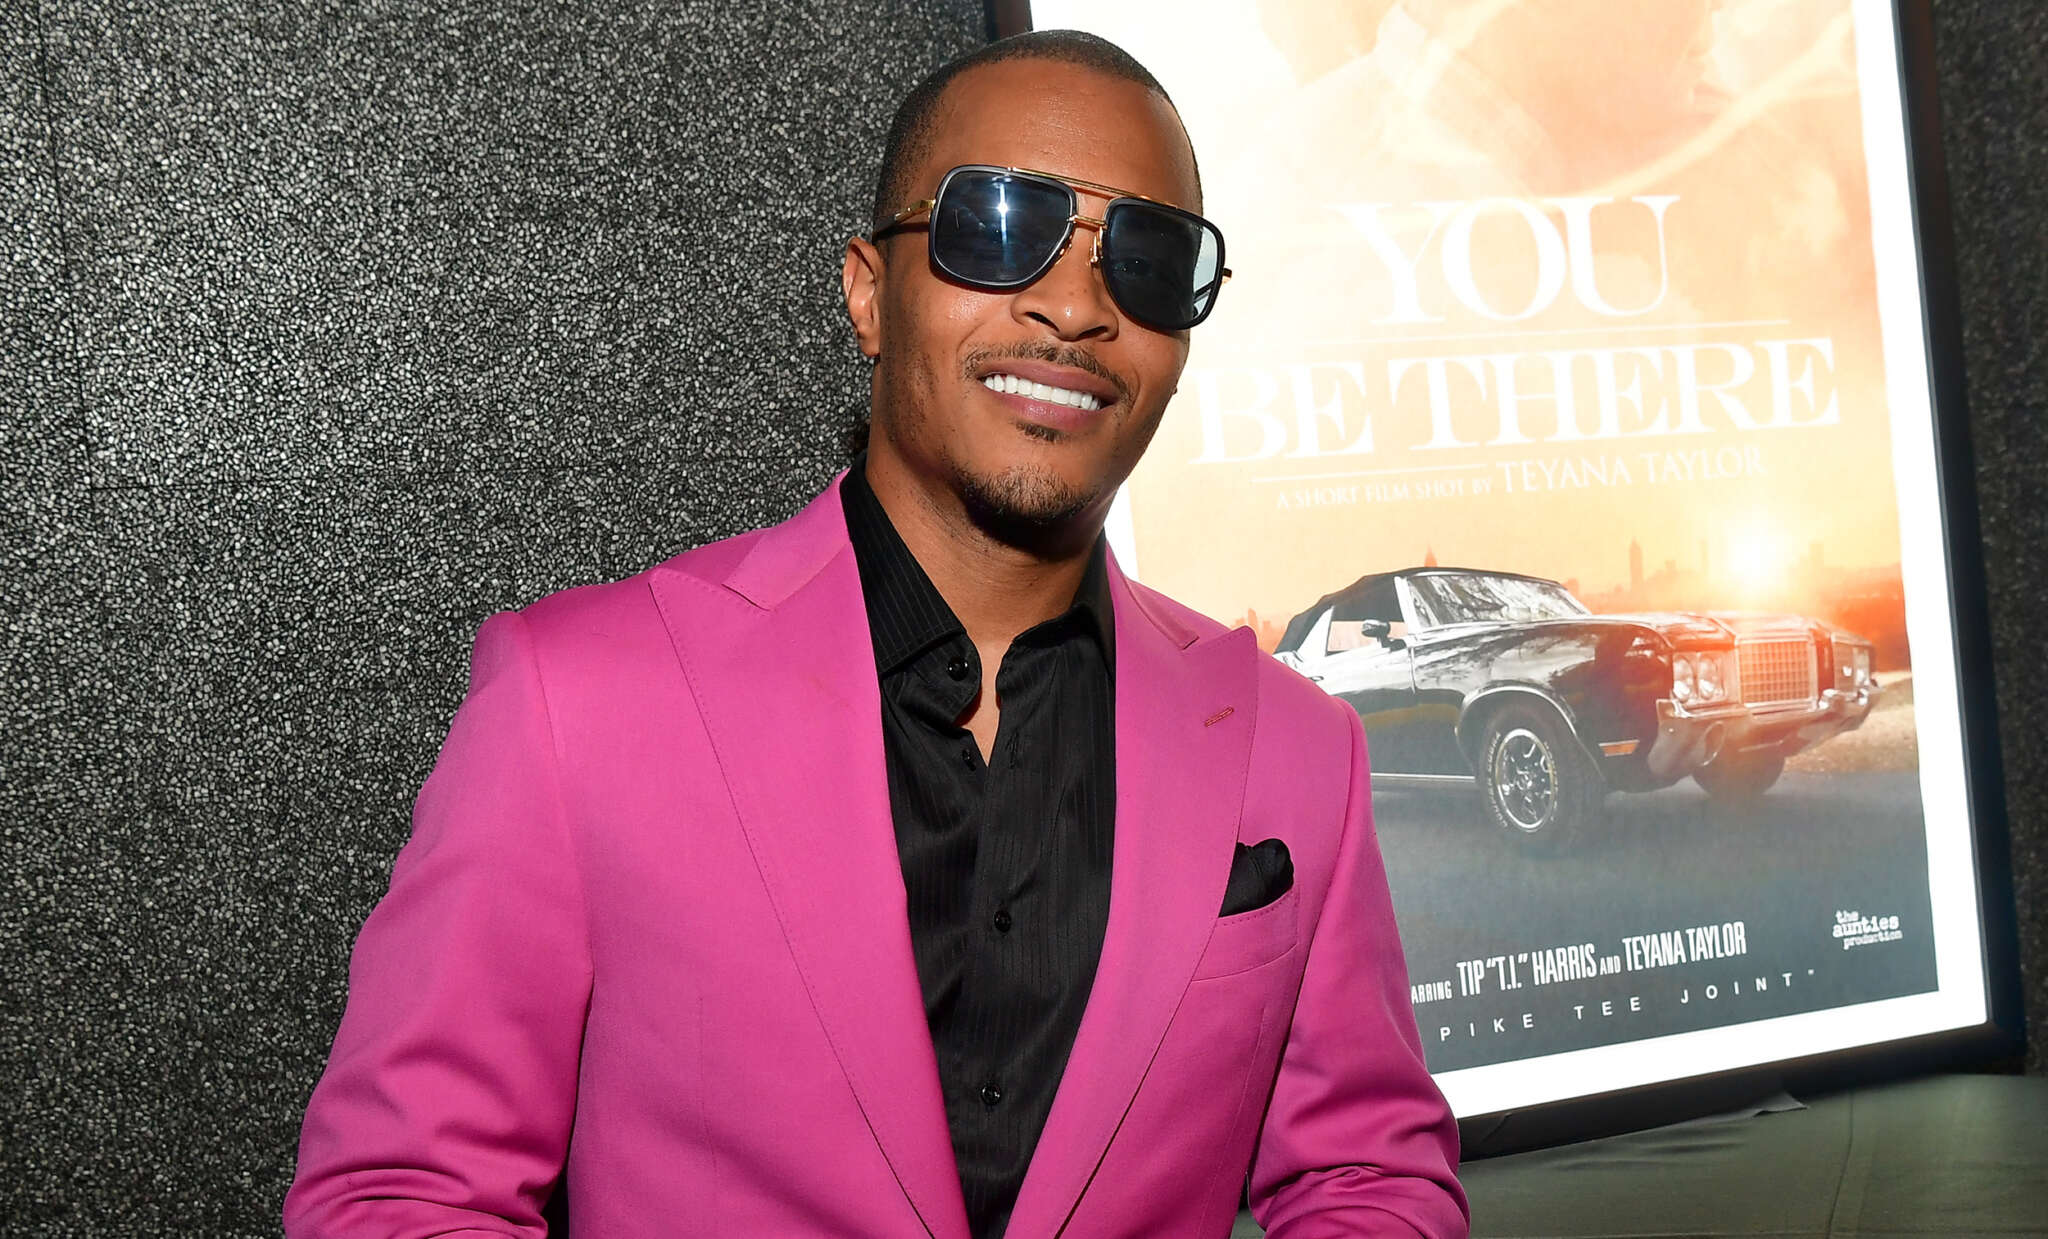 T.I. Impresses Fans With This Video Featuring A Very Smart Woman